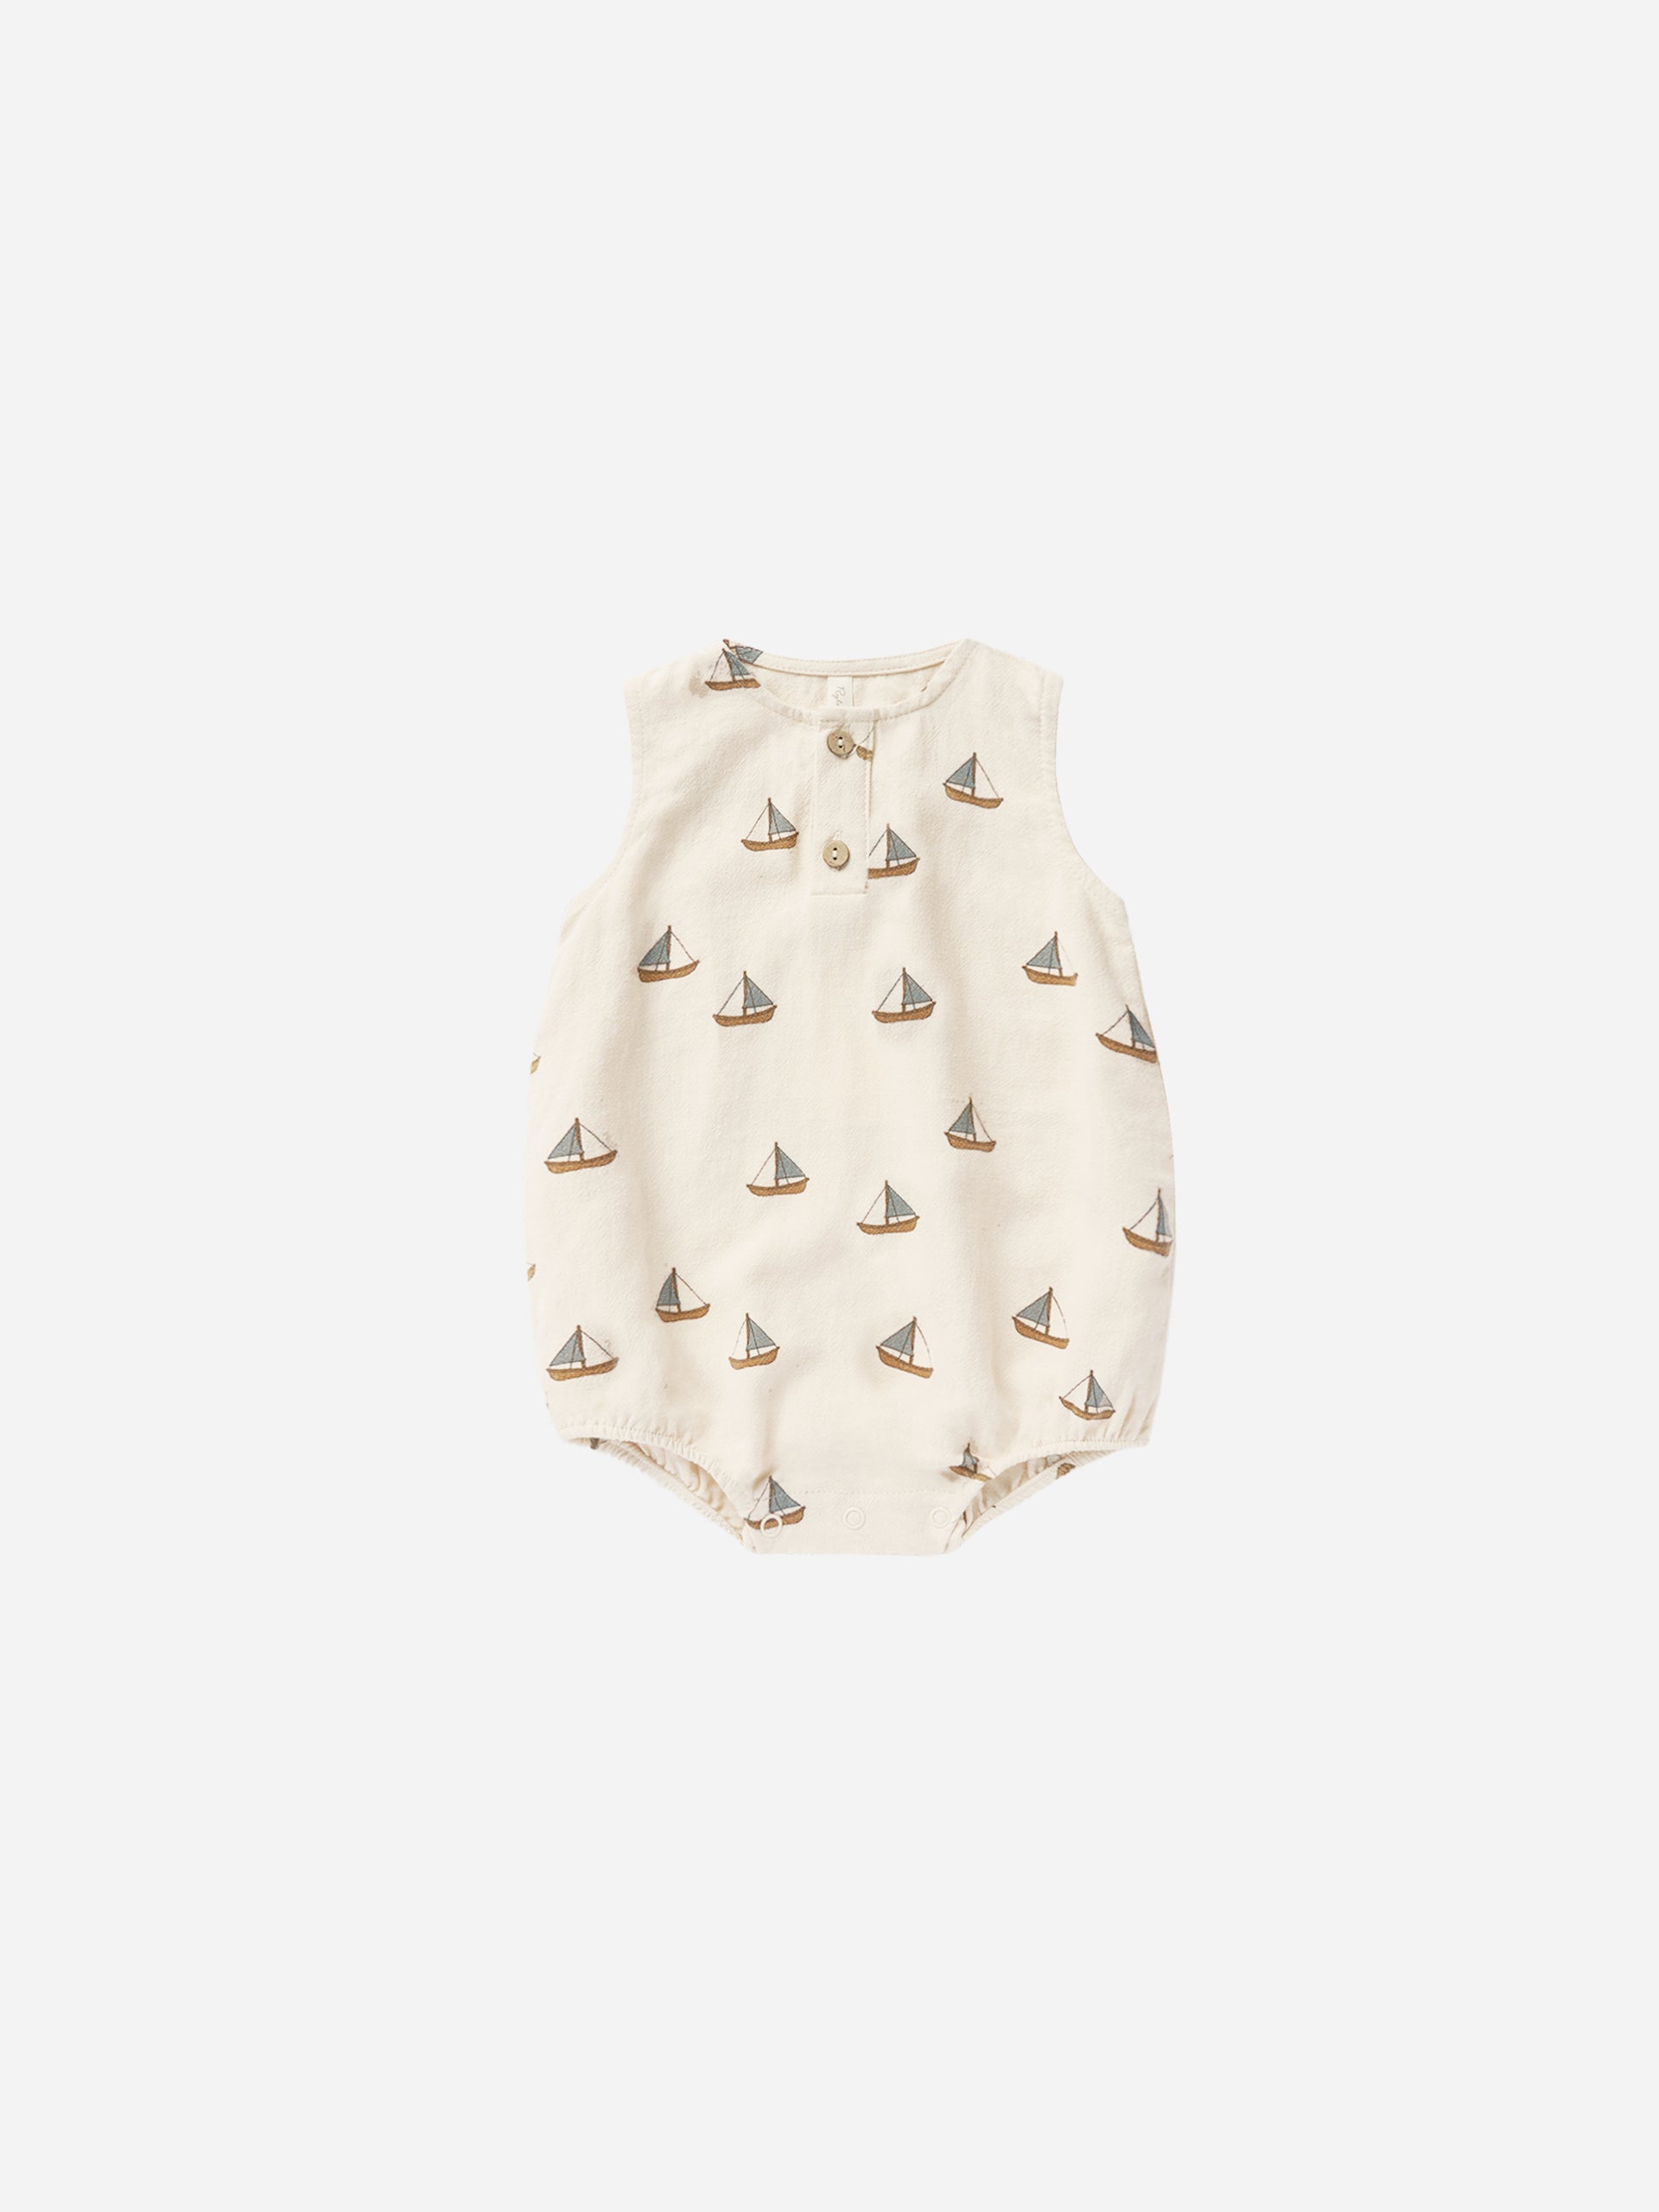 Beau Romper || Sailboats - Rylee + Cru | Kids Clothes | Trendy Baby Clothes | Modern Infant Outfits |